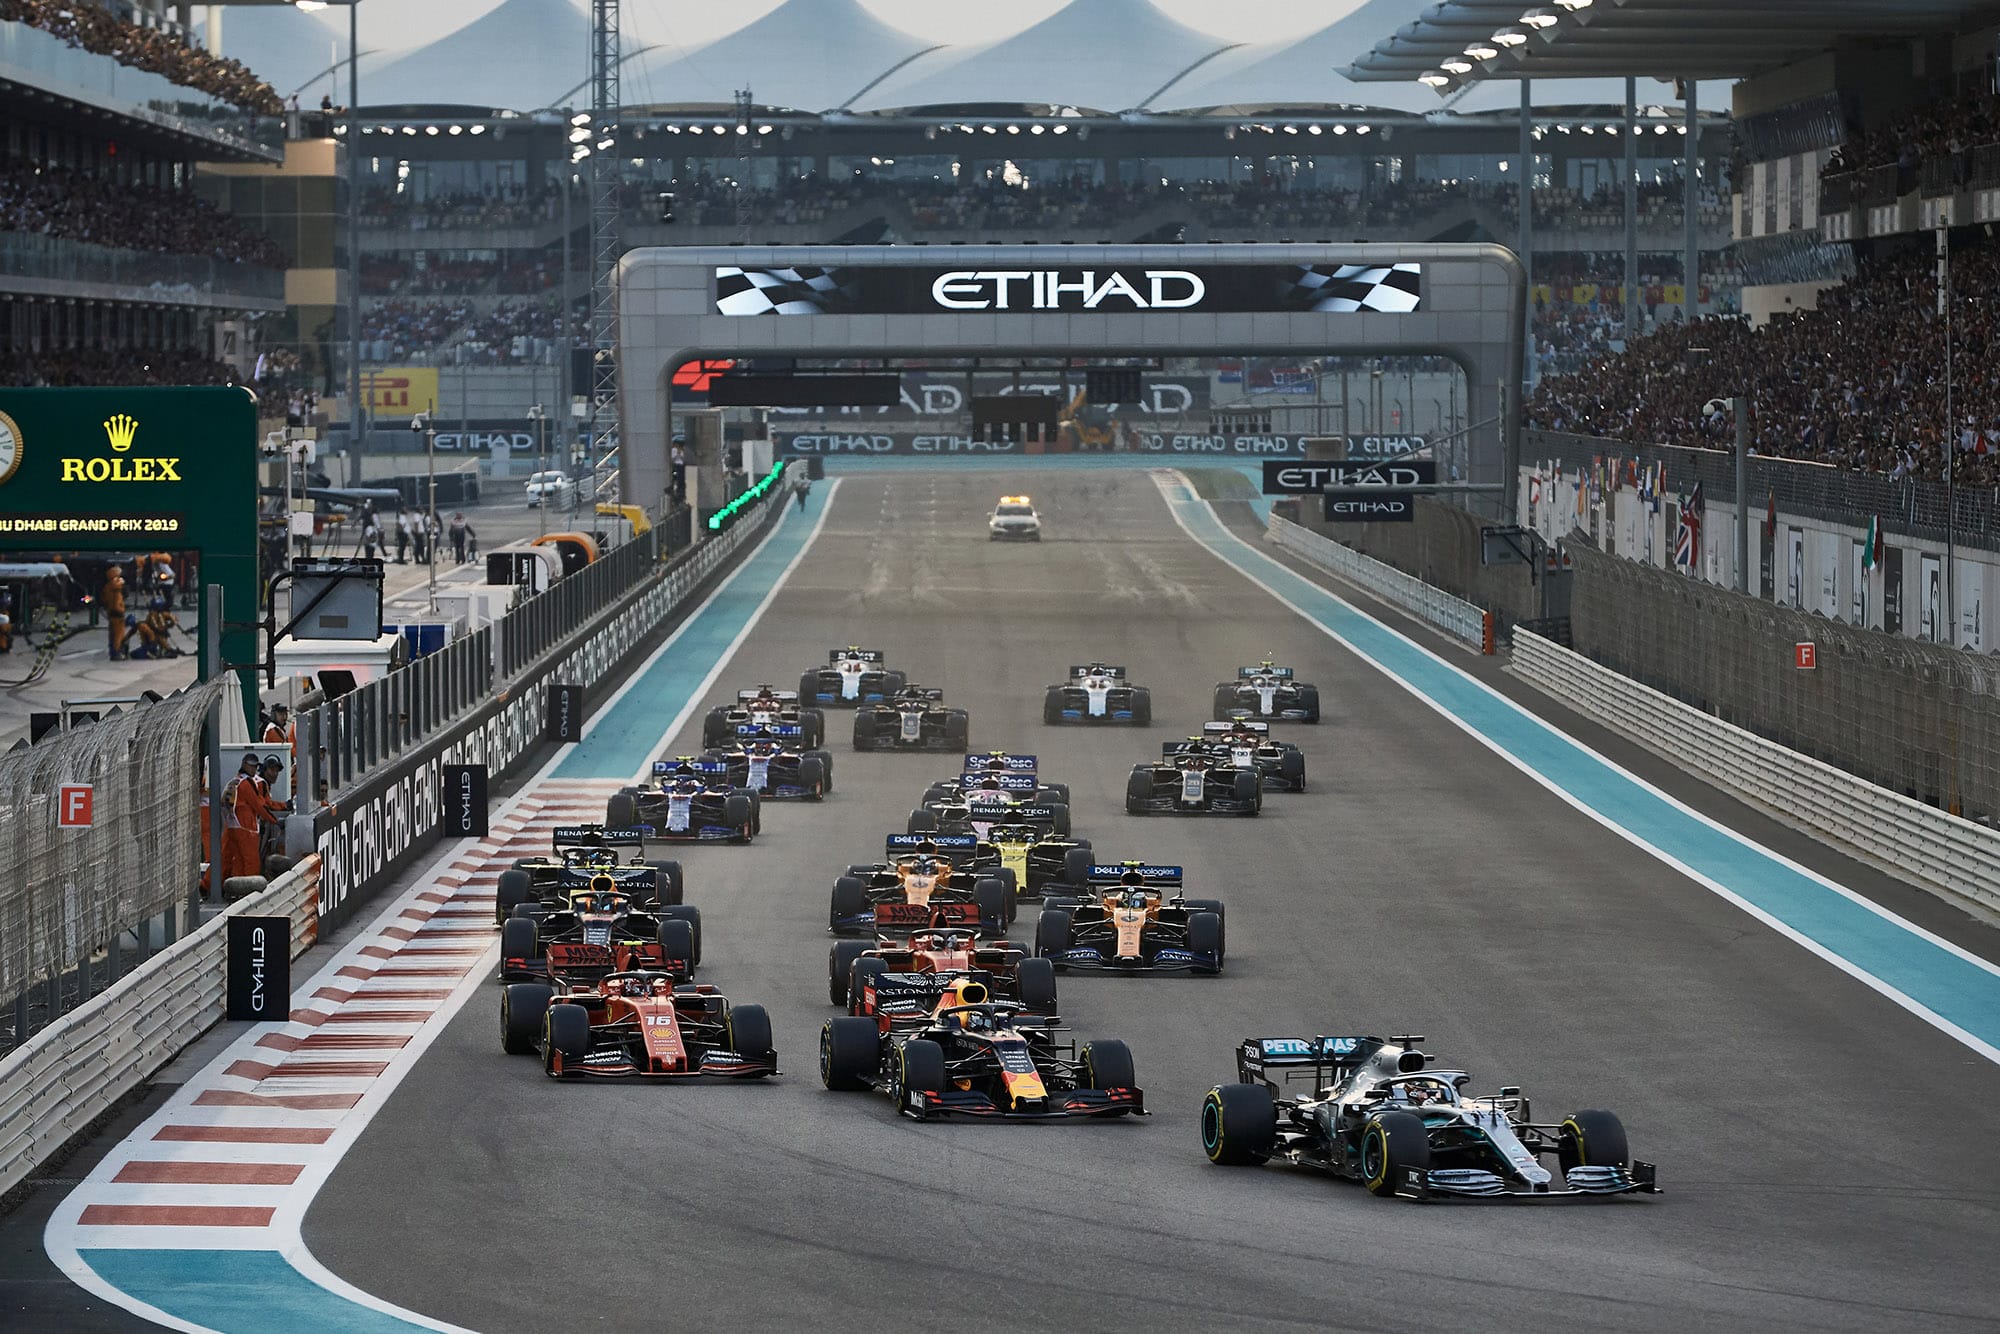 Lewis Hamilton leads at the start of the 2019 Abu Dhabi Grand Prix